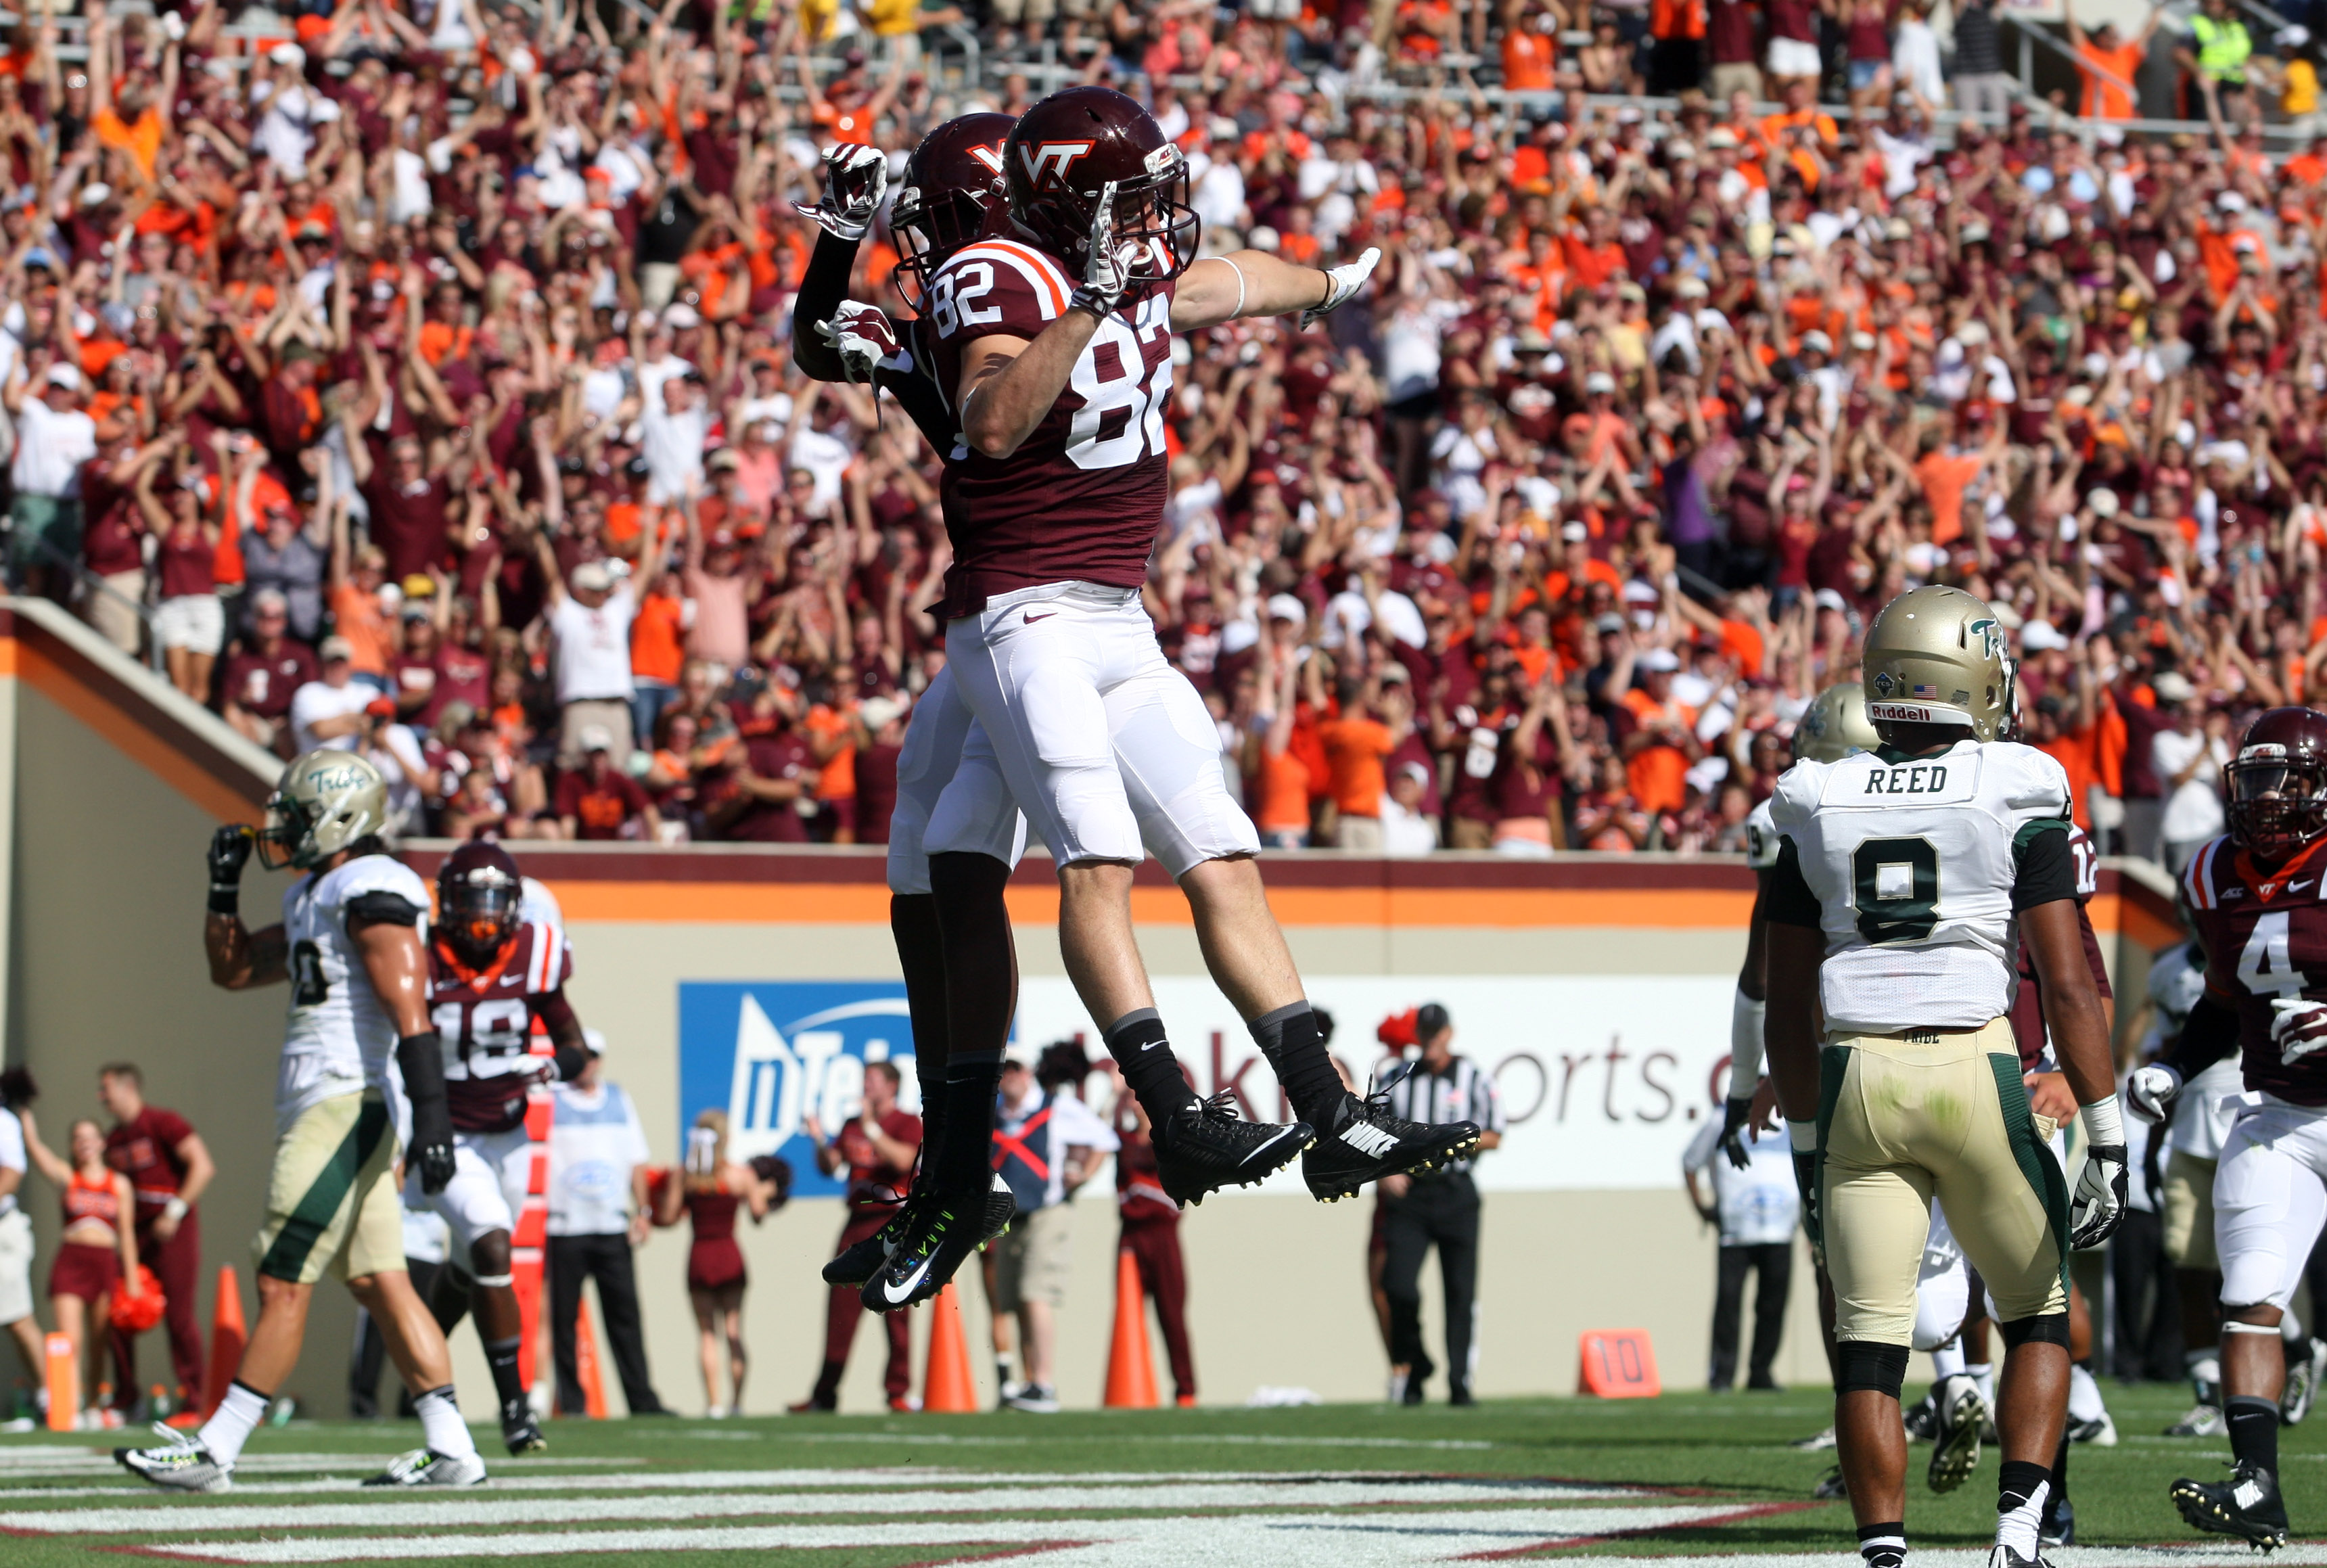 Hokie Receivers Isaiah Ford and Willie Byrn celebrating a rare touchdown